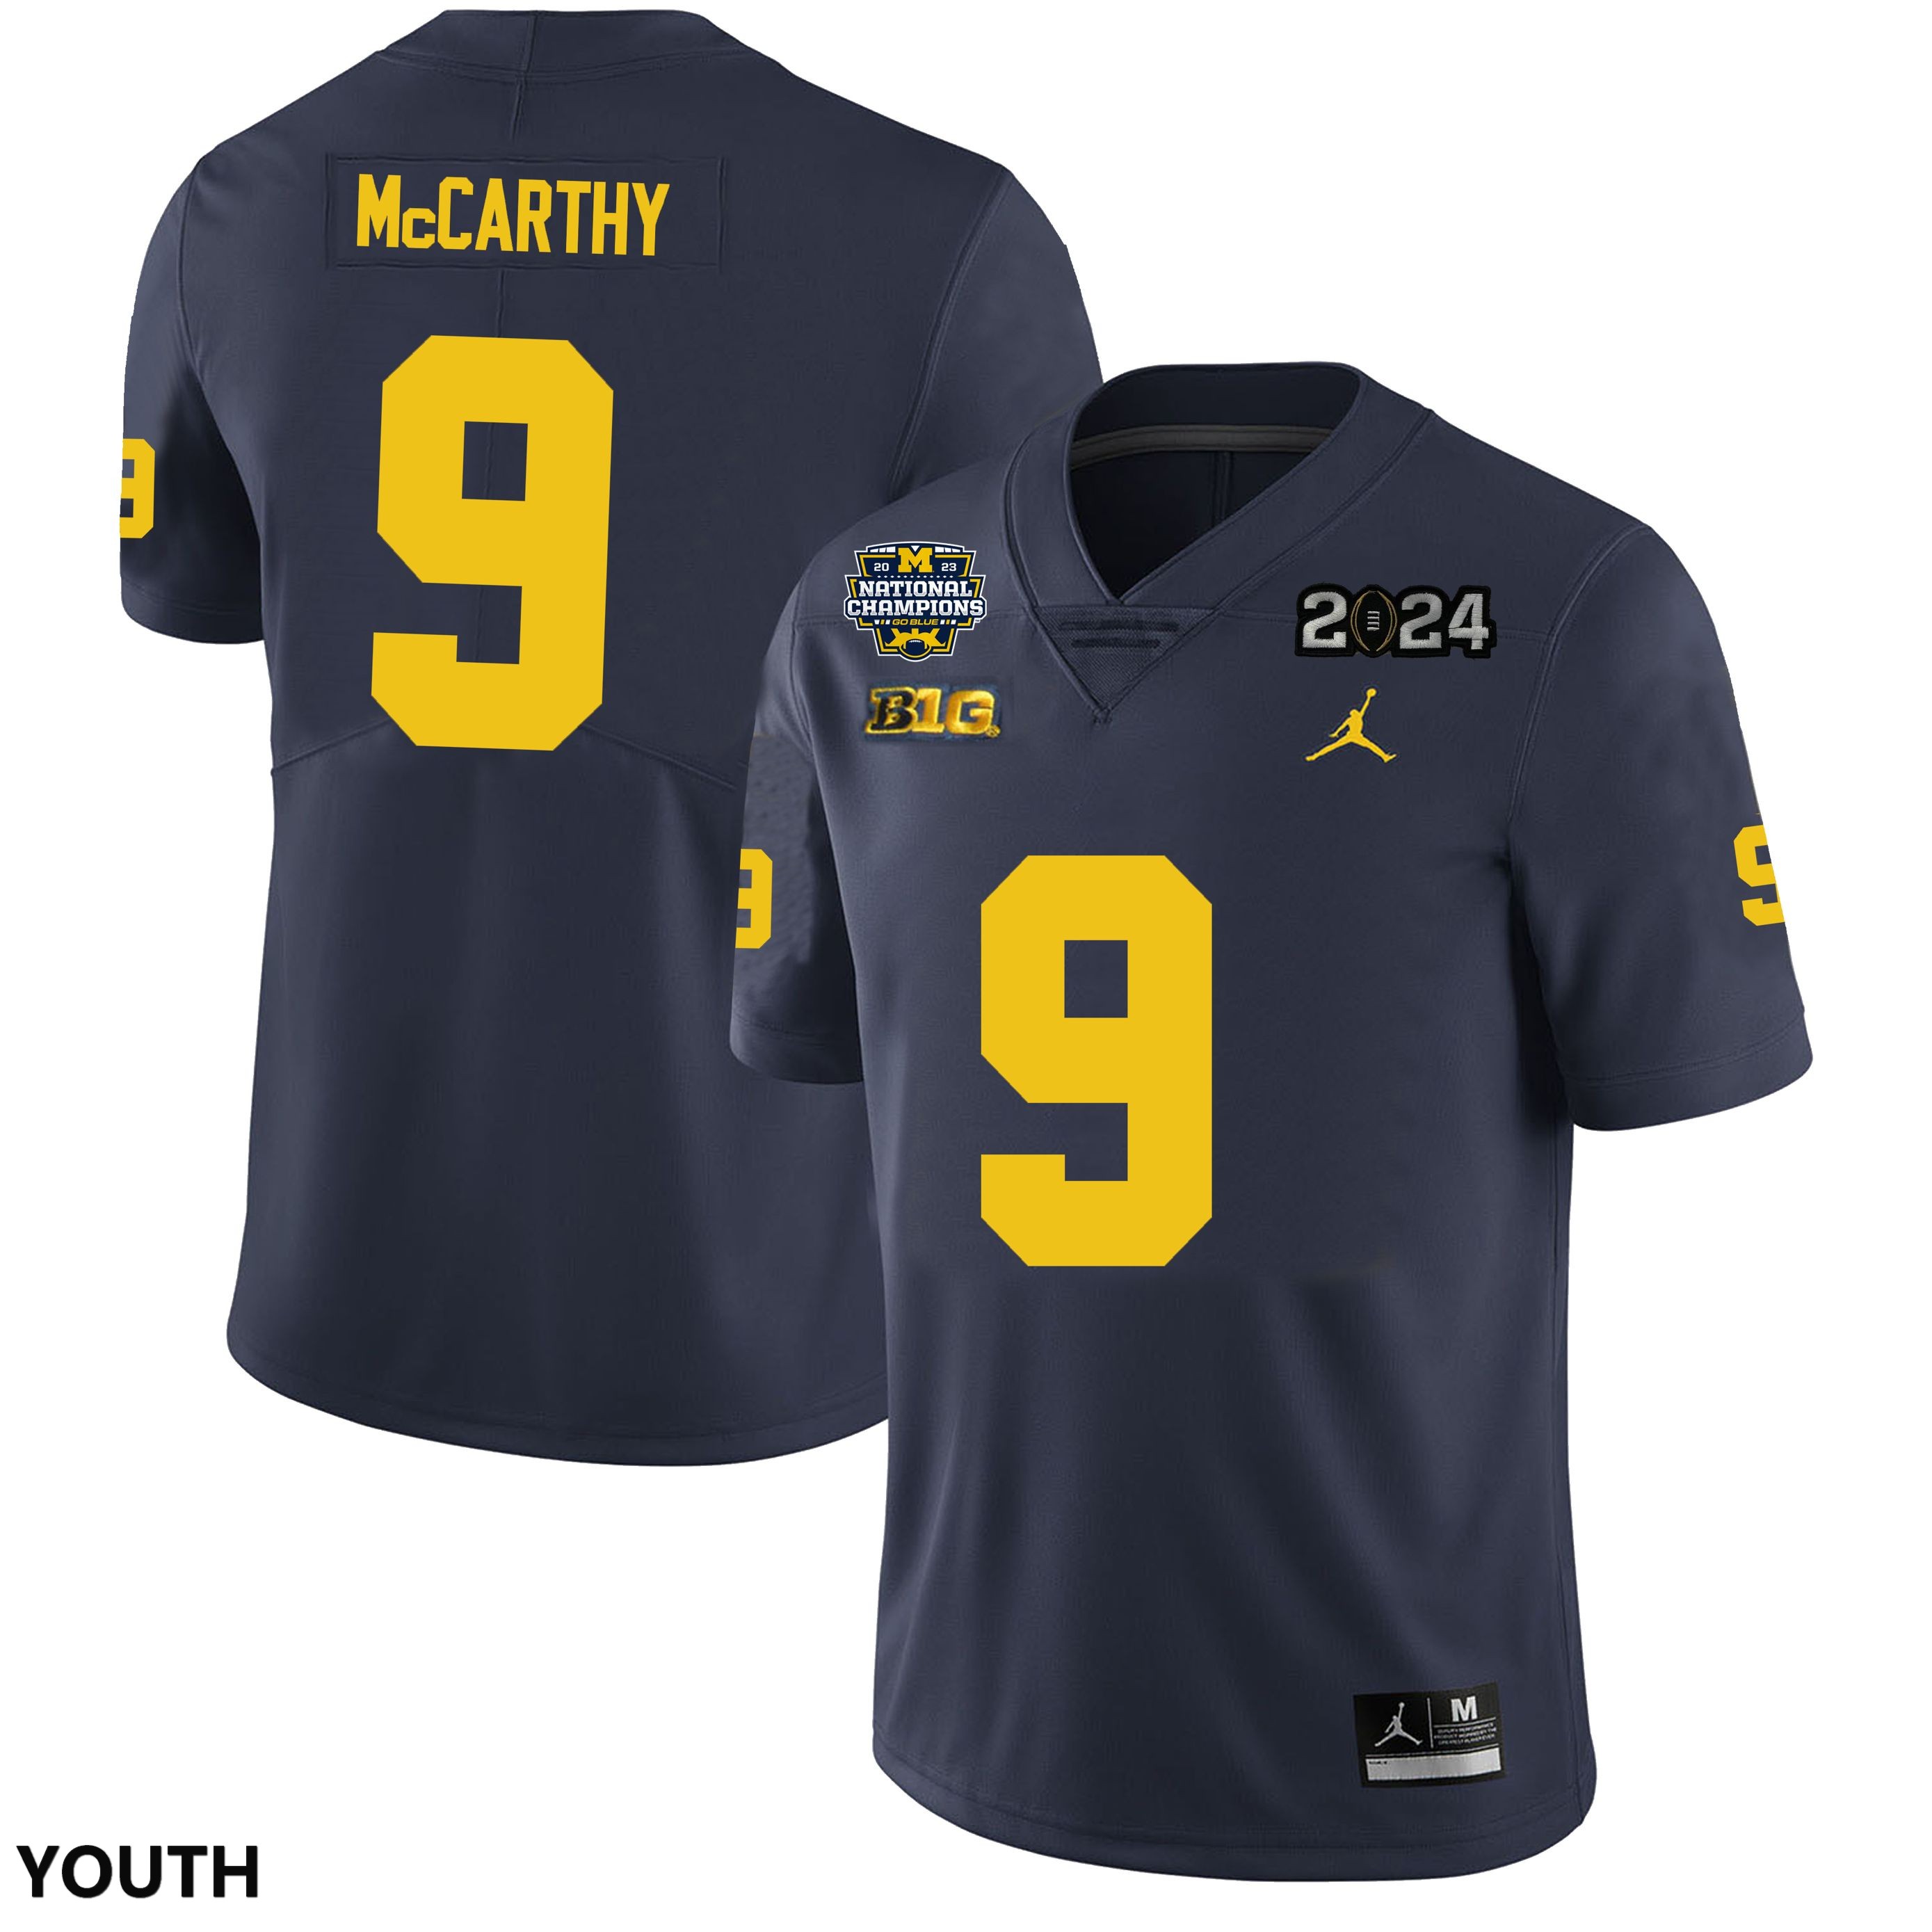 Youth NCAA Michigan Wolverines J.J. McCarthy #9 Navy National Champions Stitched College Football Jersey DQ251I1EY